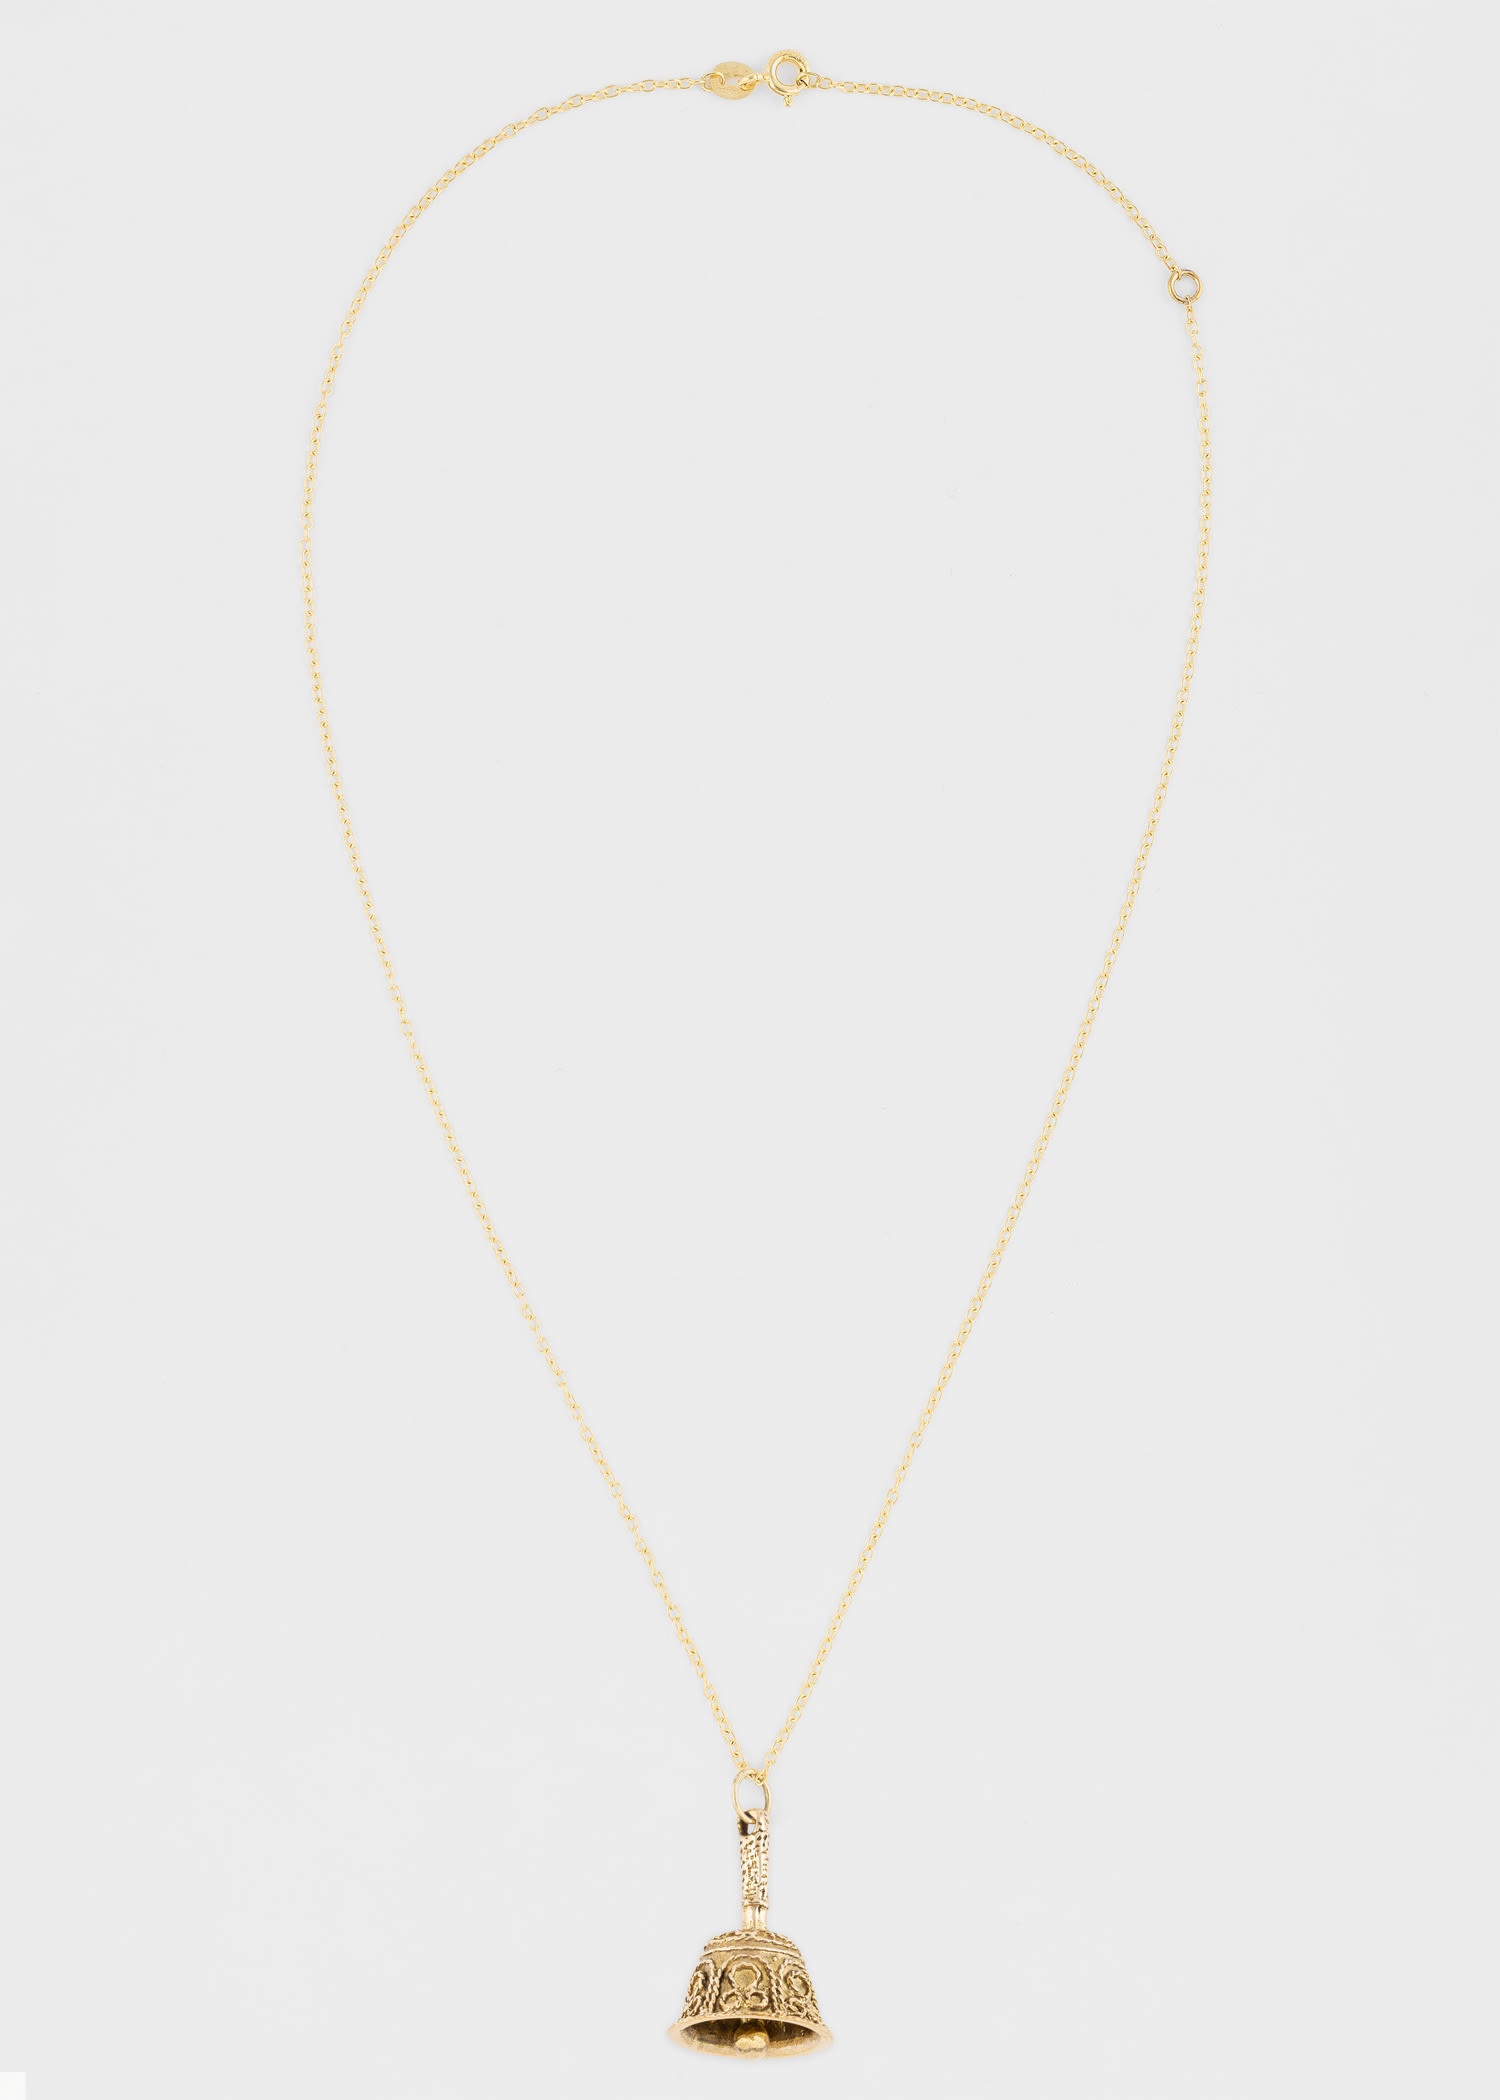 'Artfully Articulated Bell' Vintage Gold Necklace - 2